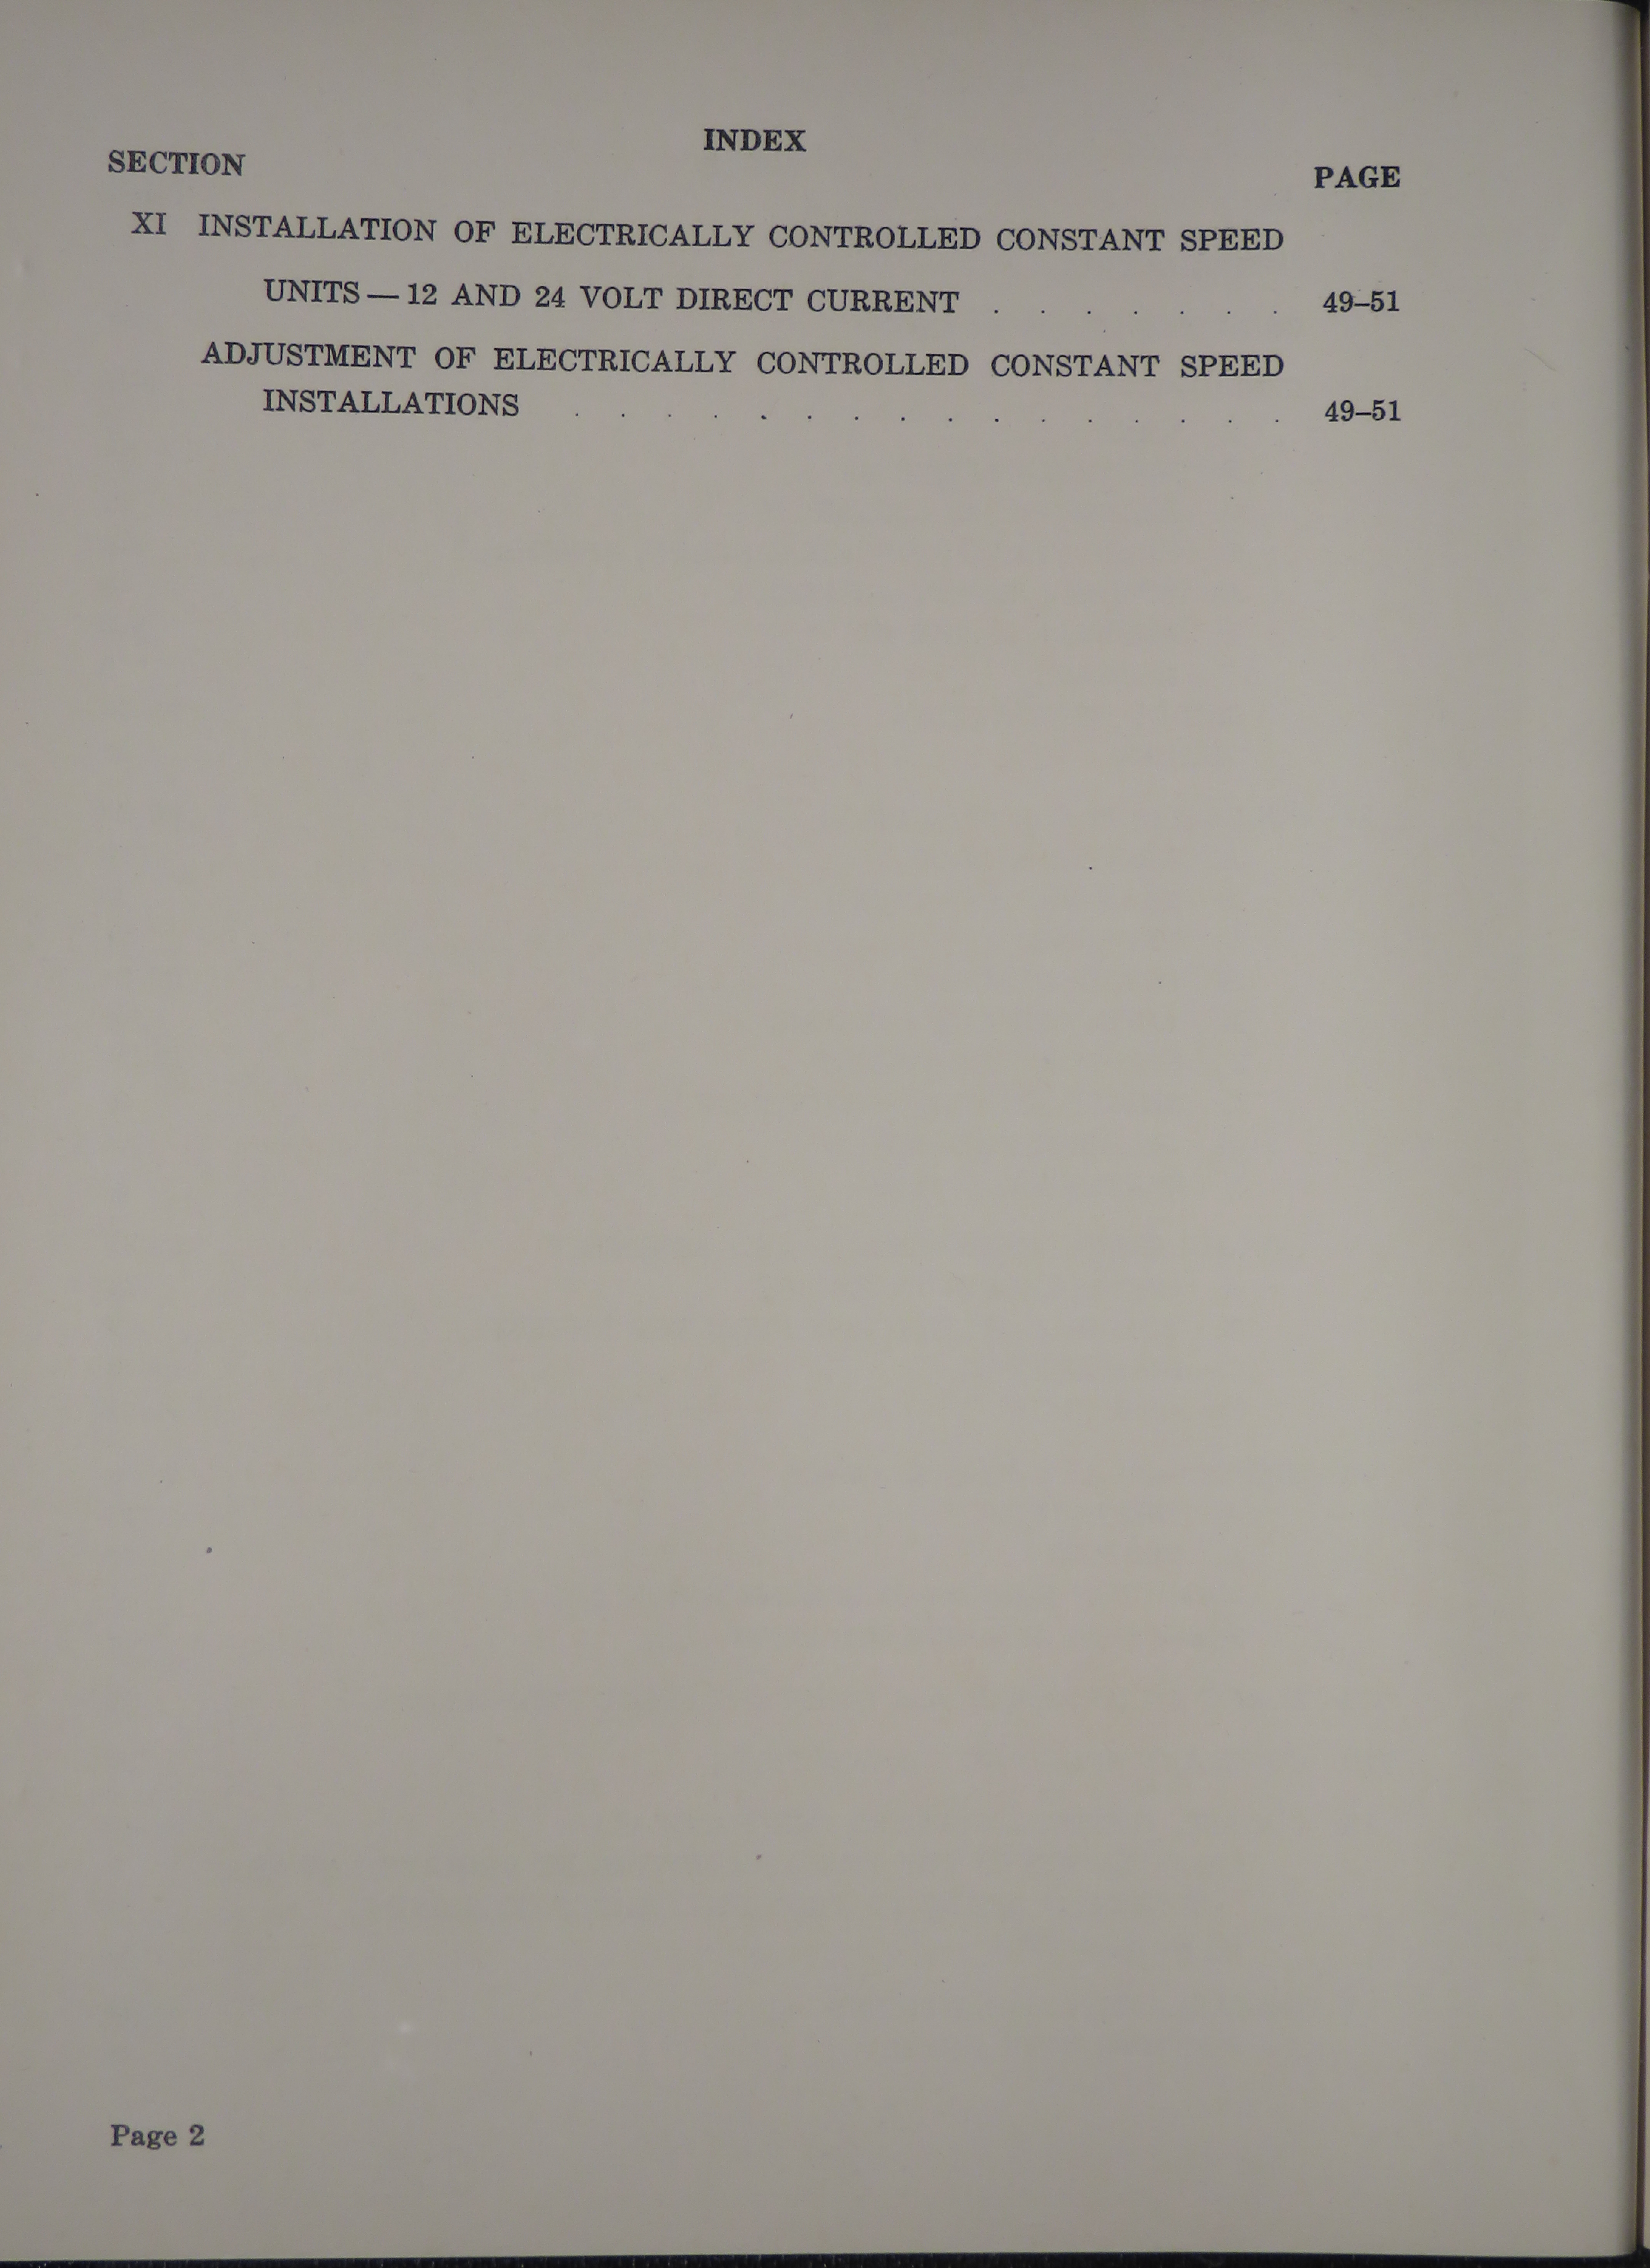 Sample page 6 from AirCorps Library document: Constant Speed Control Service Manual